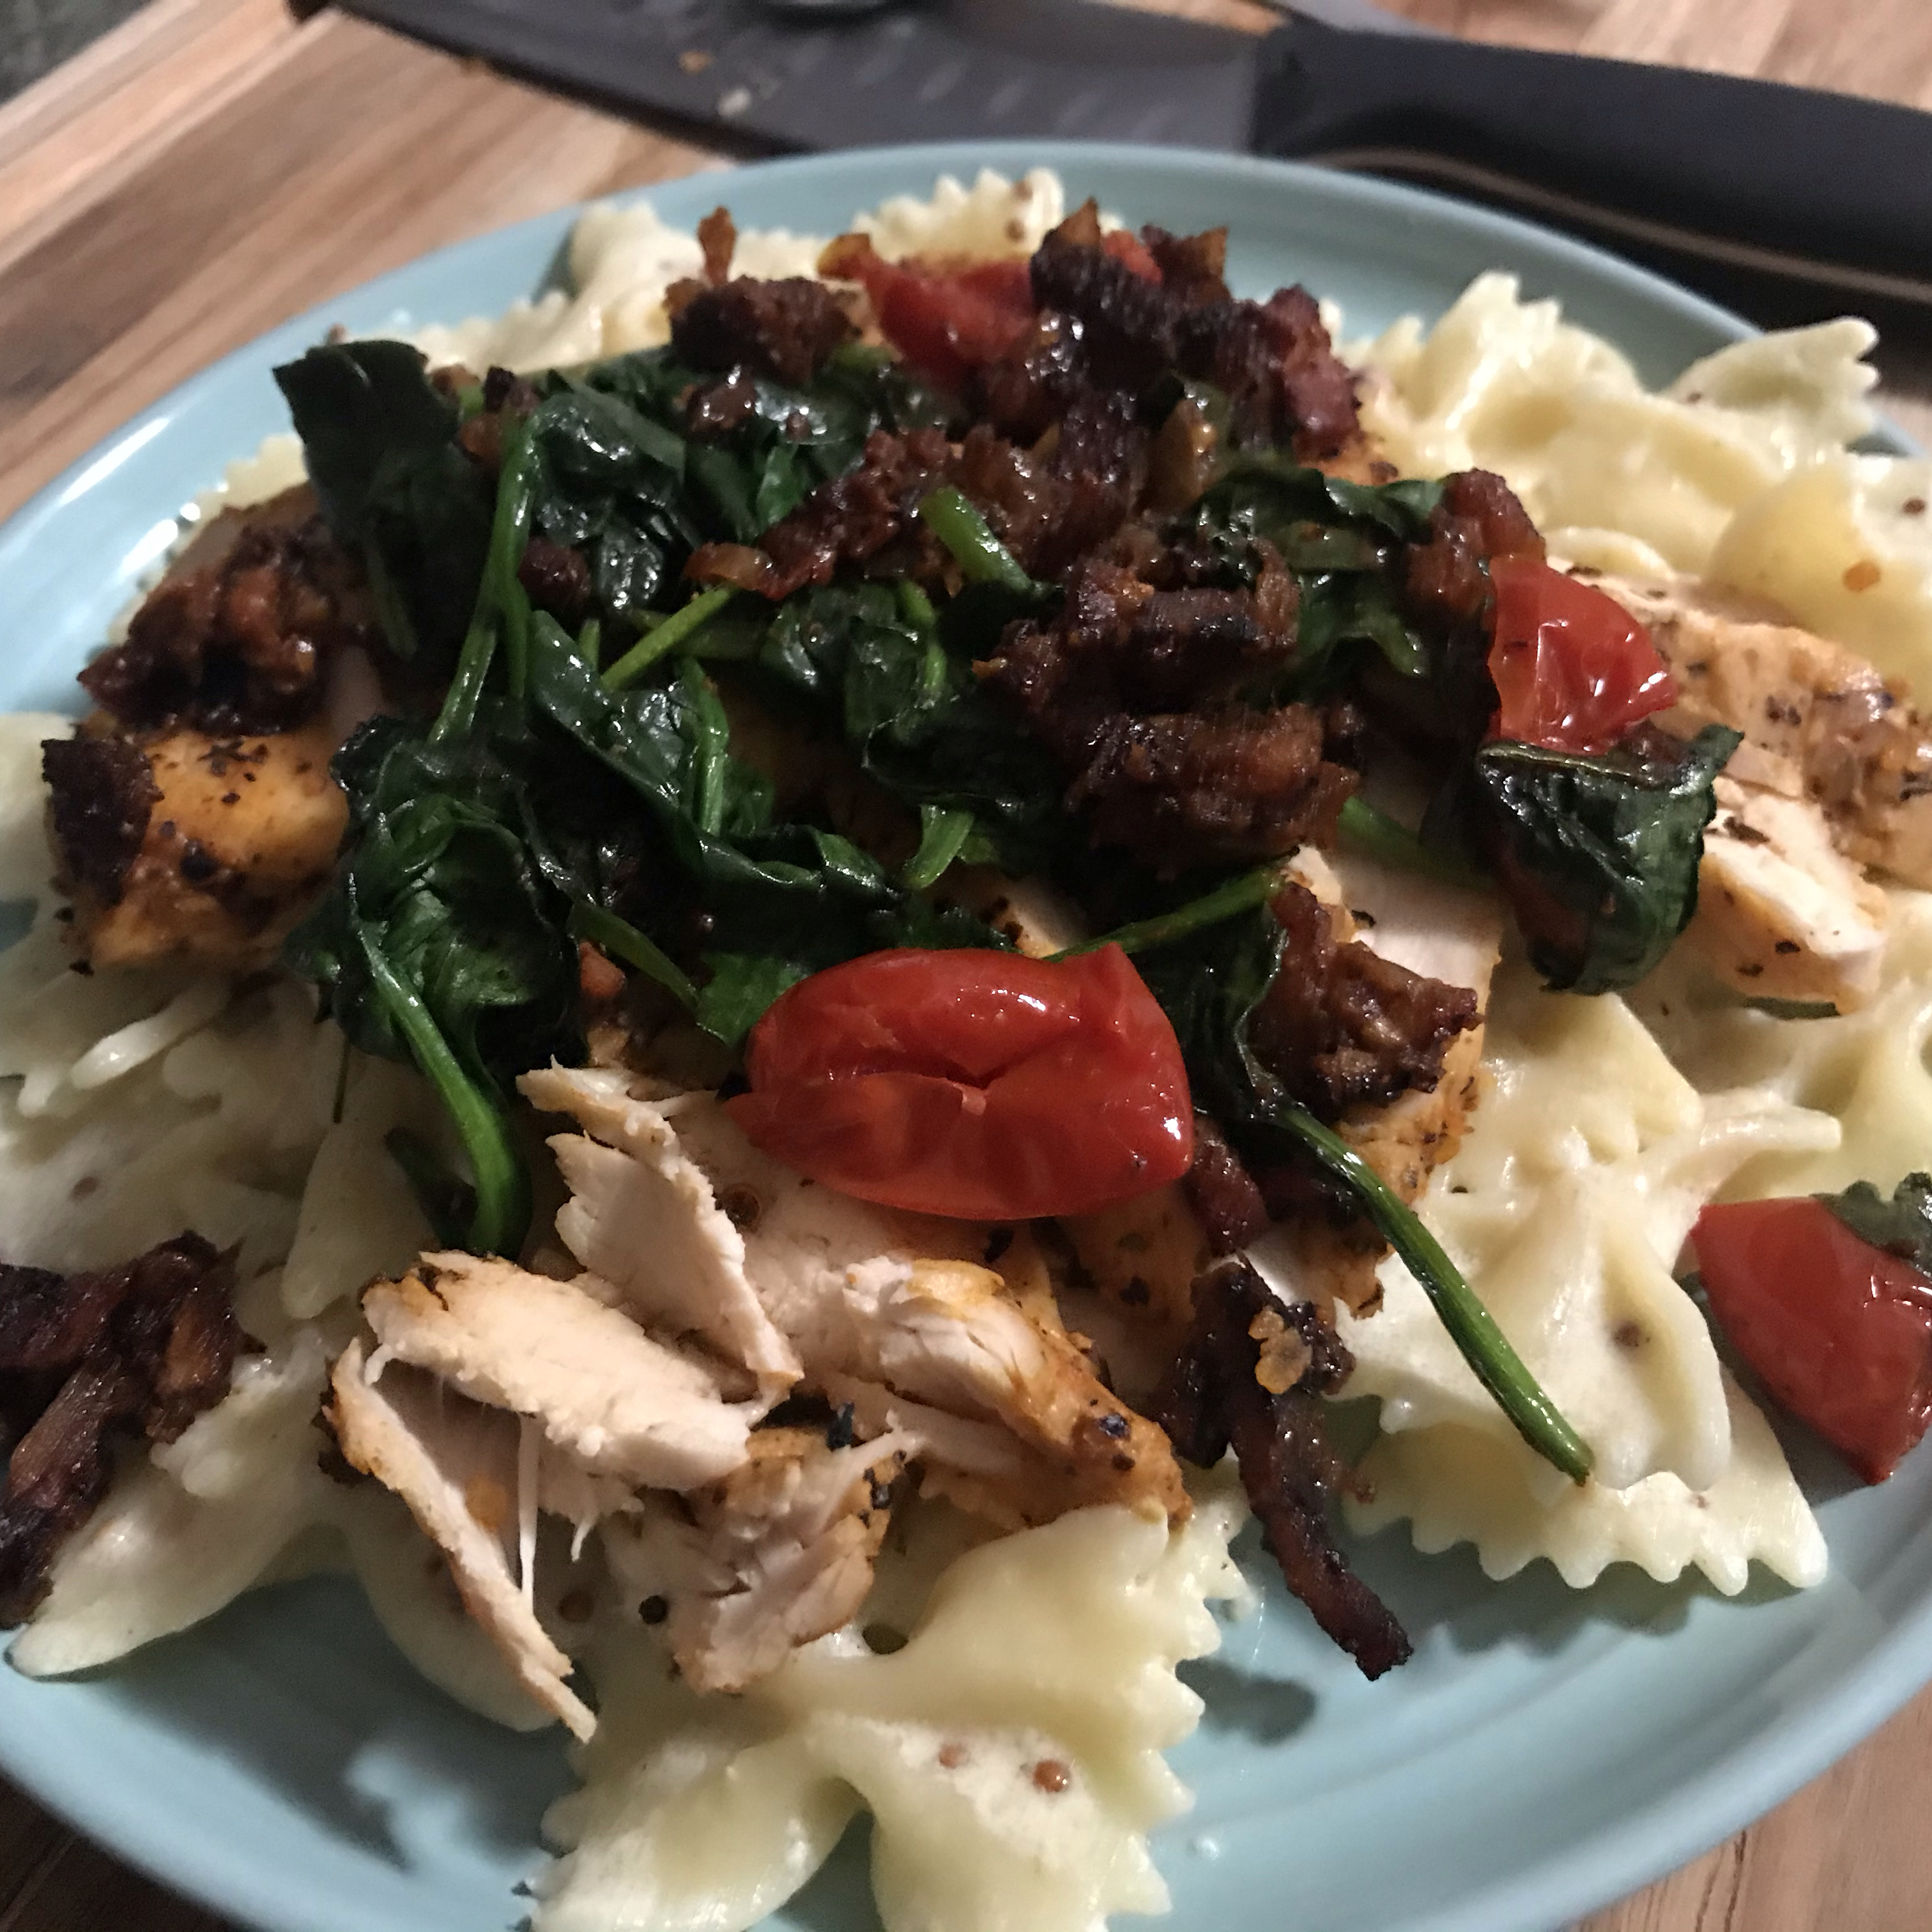 Mascarpone Pasta with Chicken, Bacon and Spinach Paul Donovan